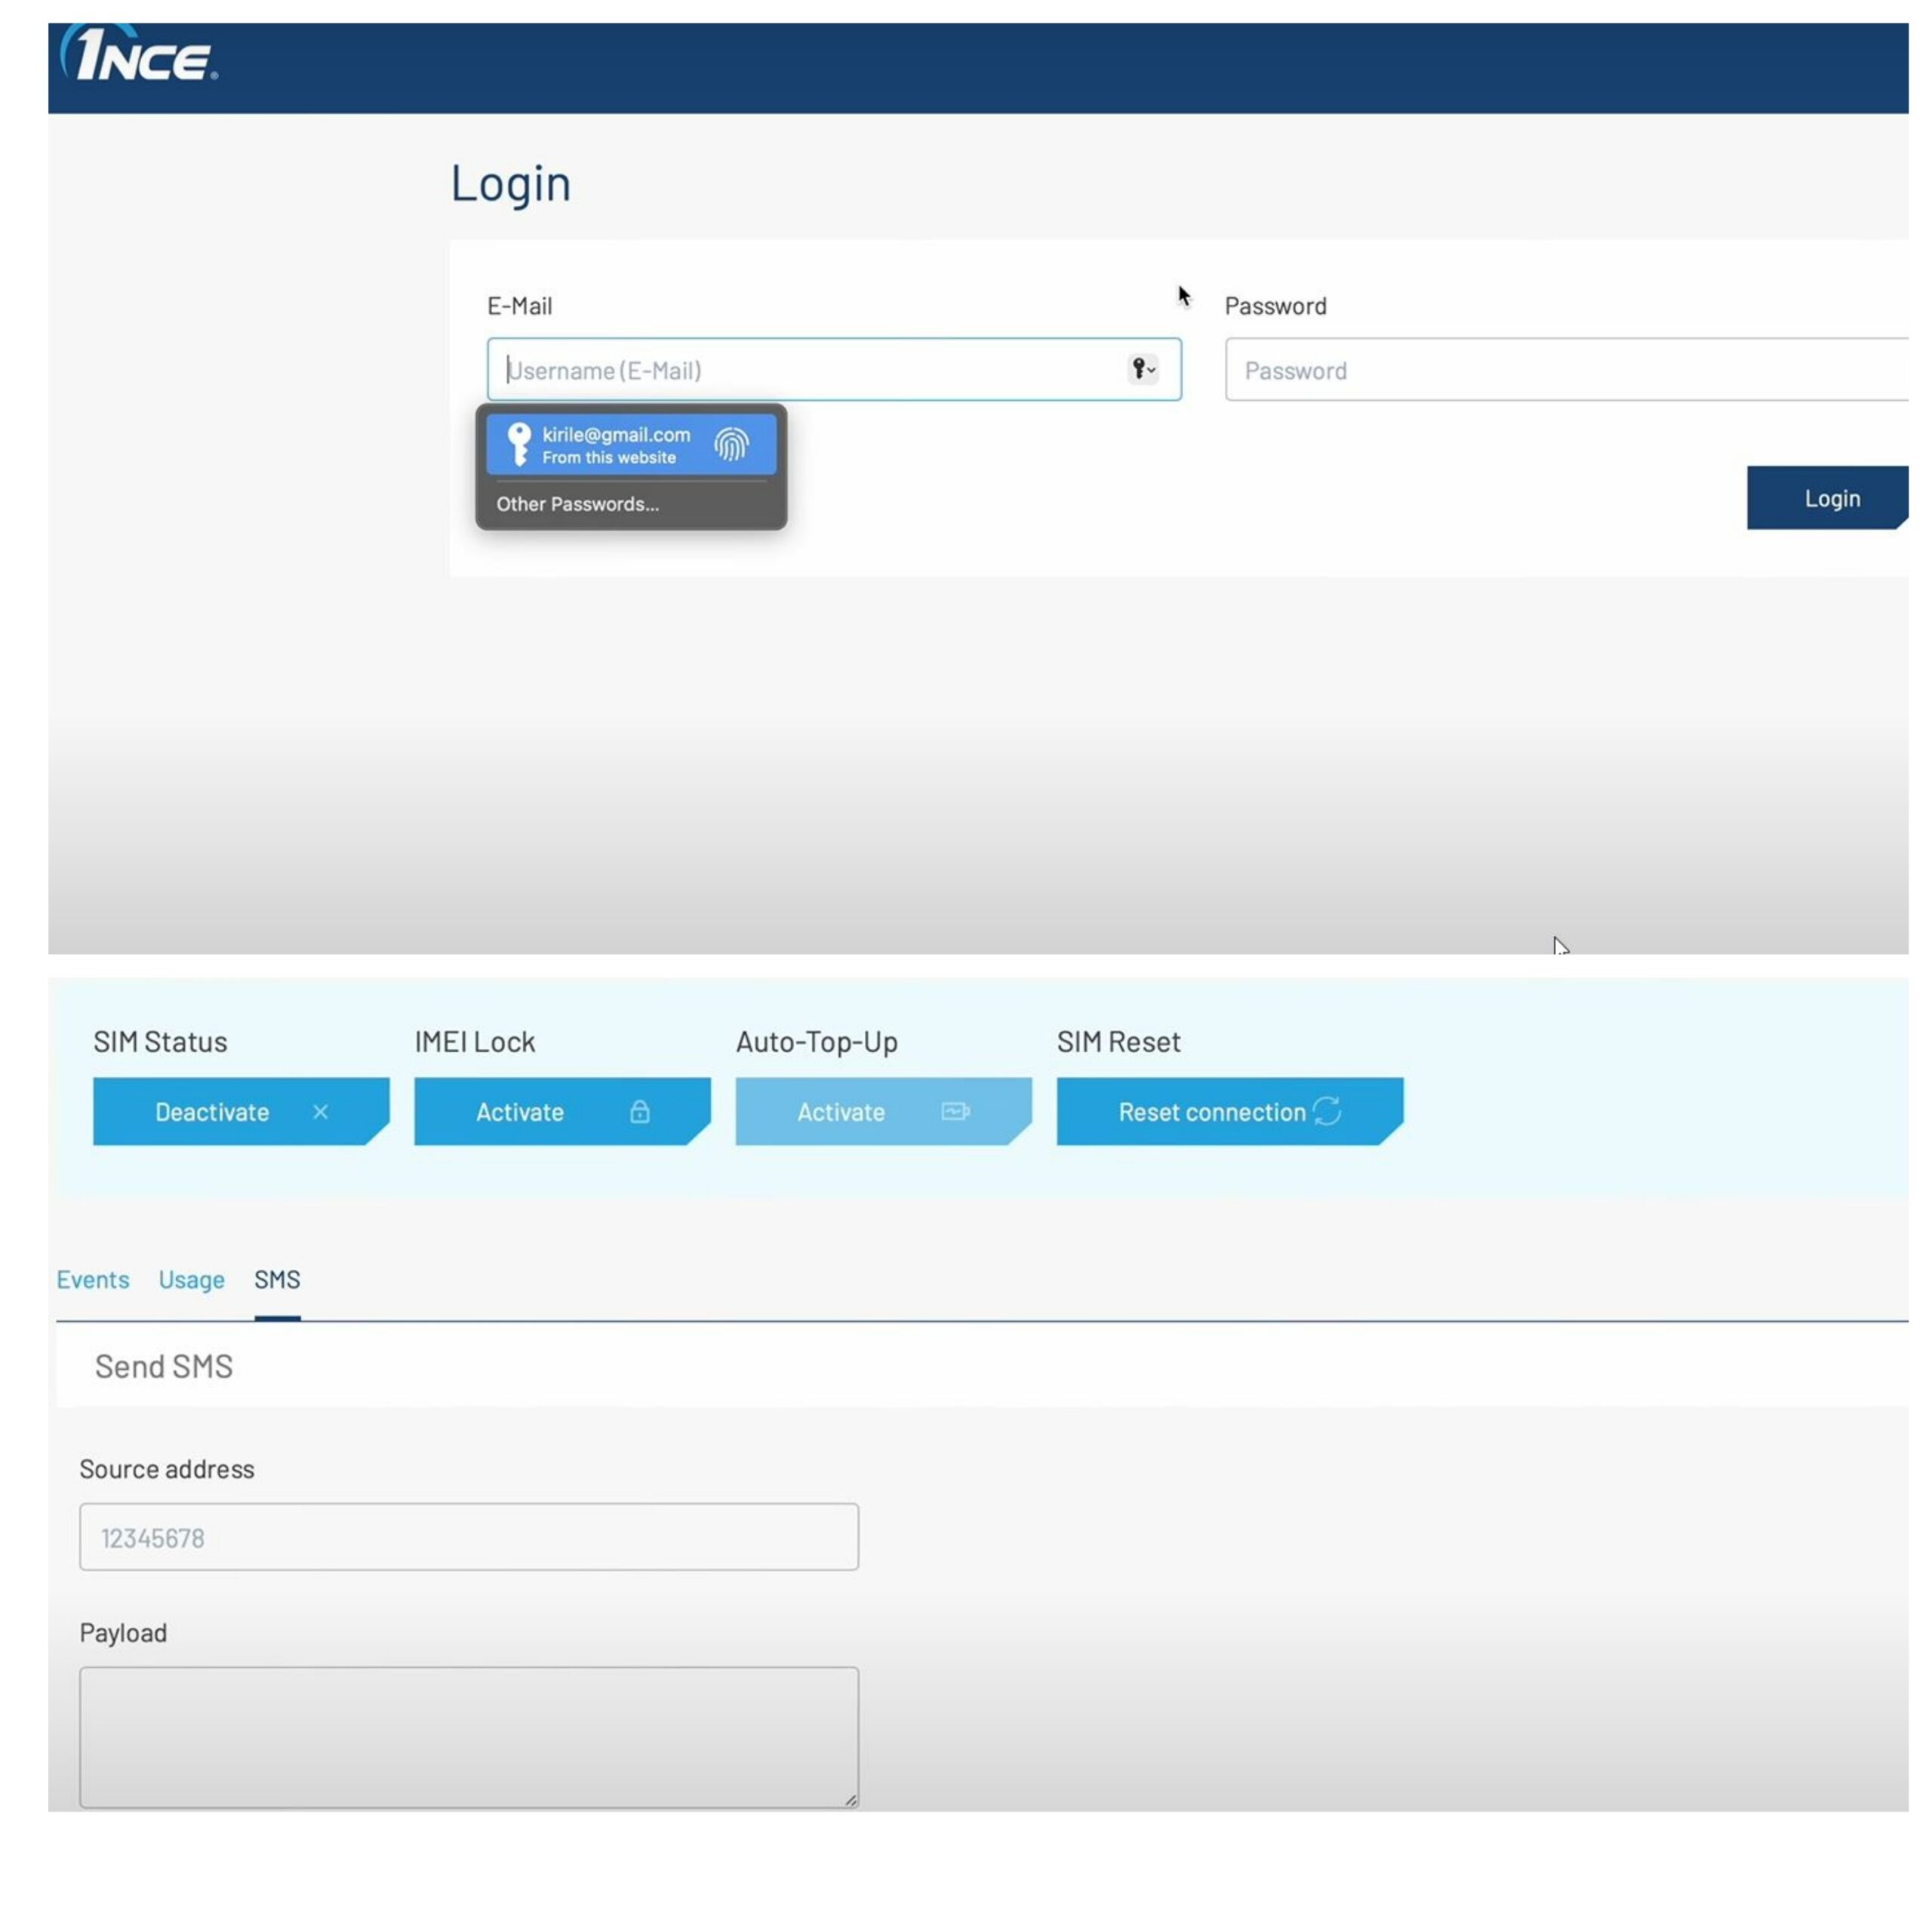 How to log in the 1nce portal and Sim card menu